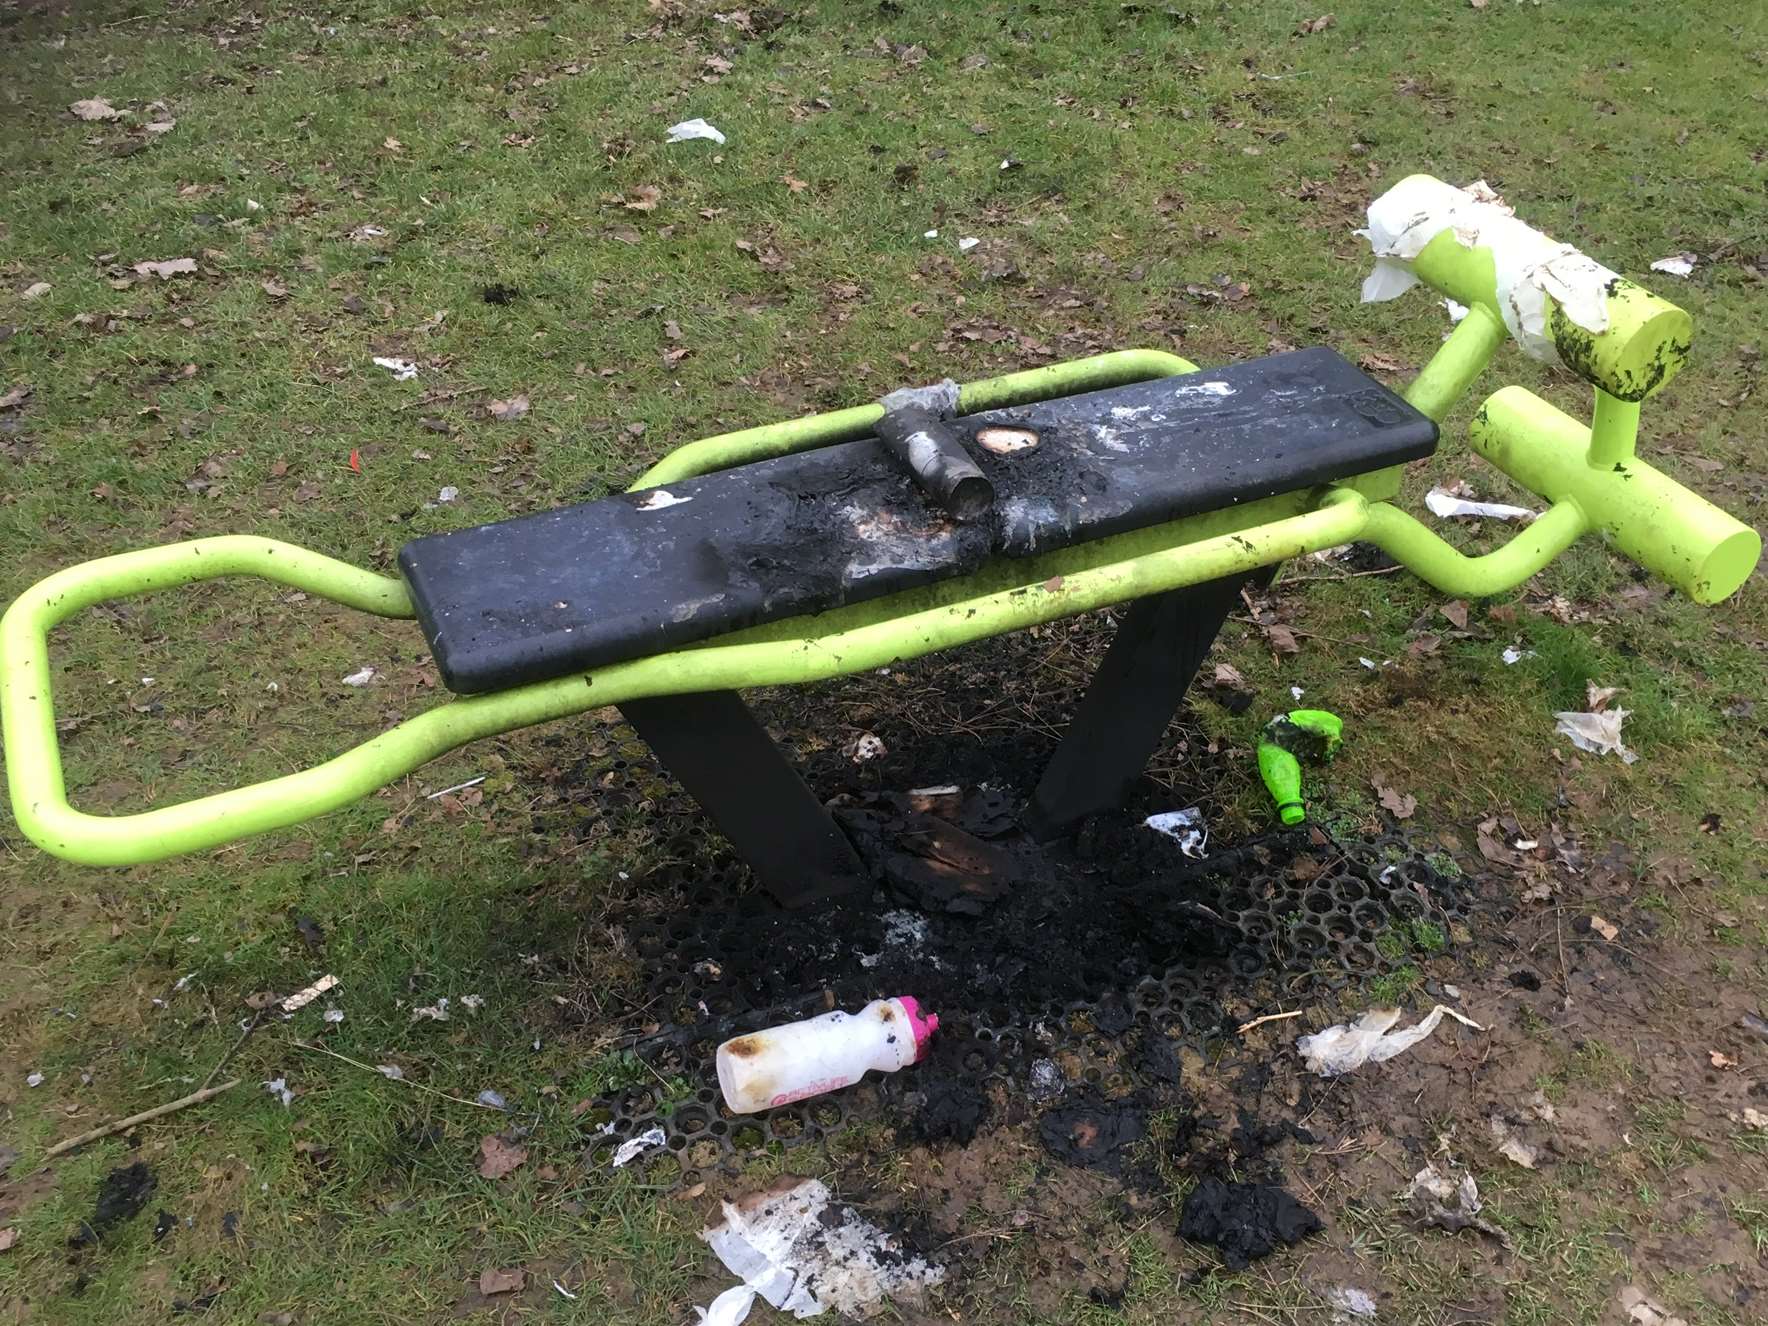 The outdoor equipment was burnt in the fire